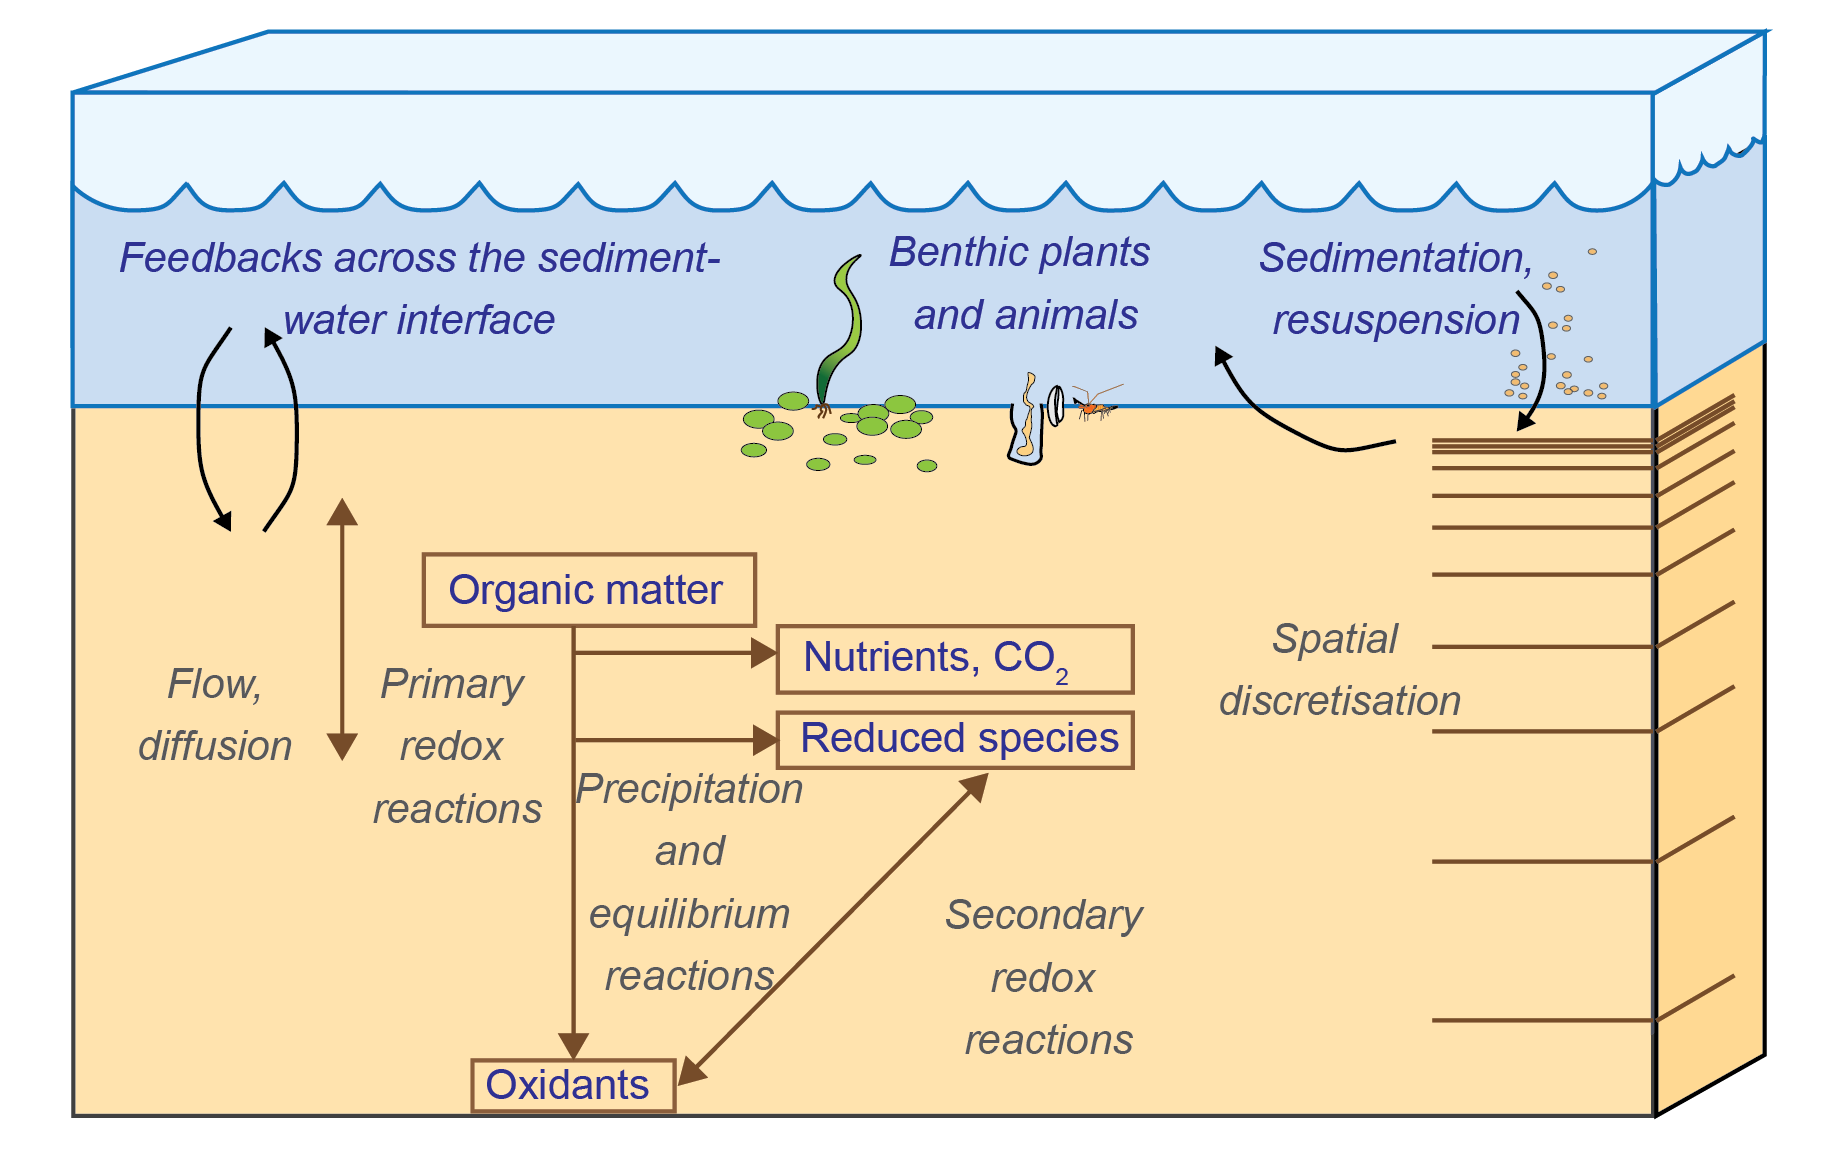 Schematic of the main physical and chemical processes that cause chemical concentration and flux change in the sediment and across the sediment-water interface, and therefore are included in most sediment diagenesis models.